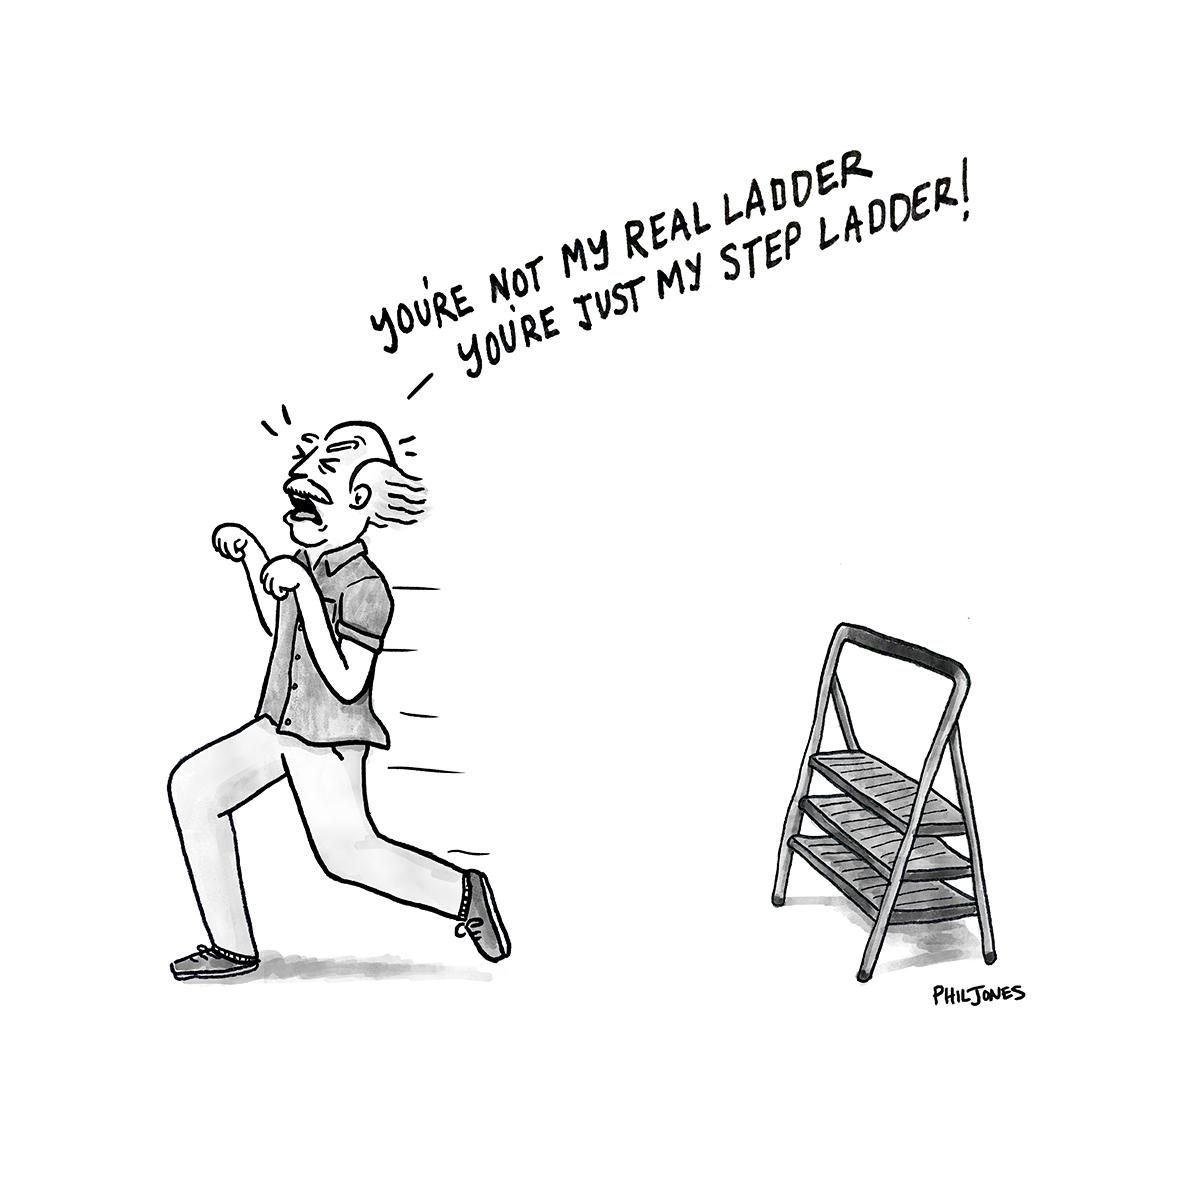 Ladder issues